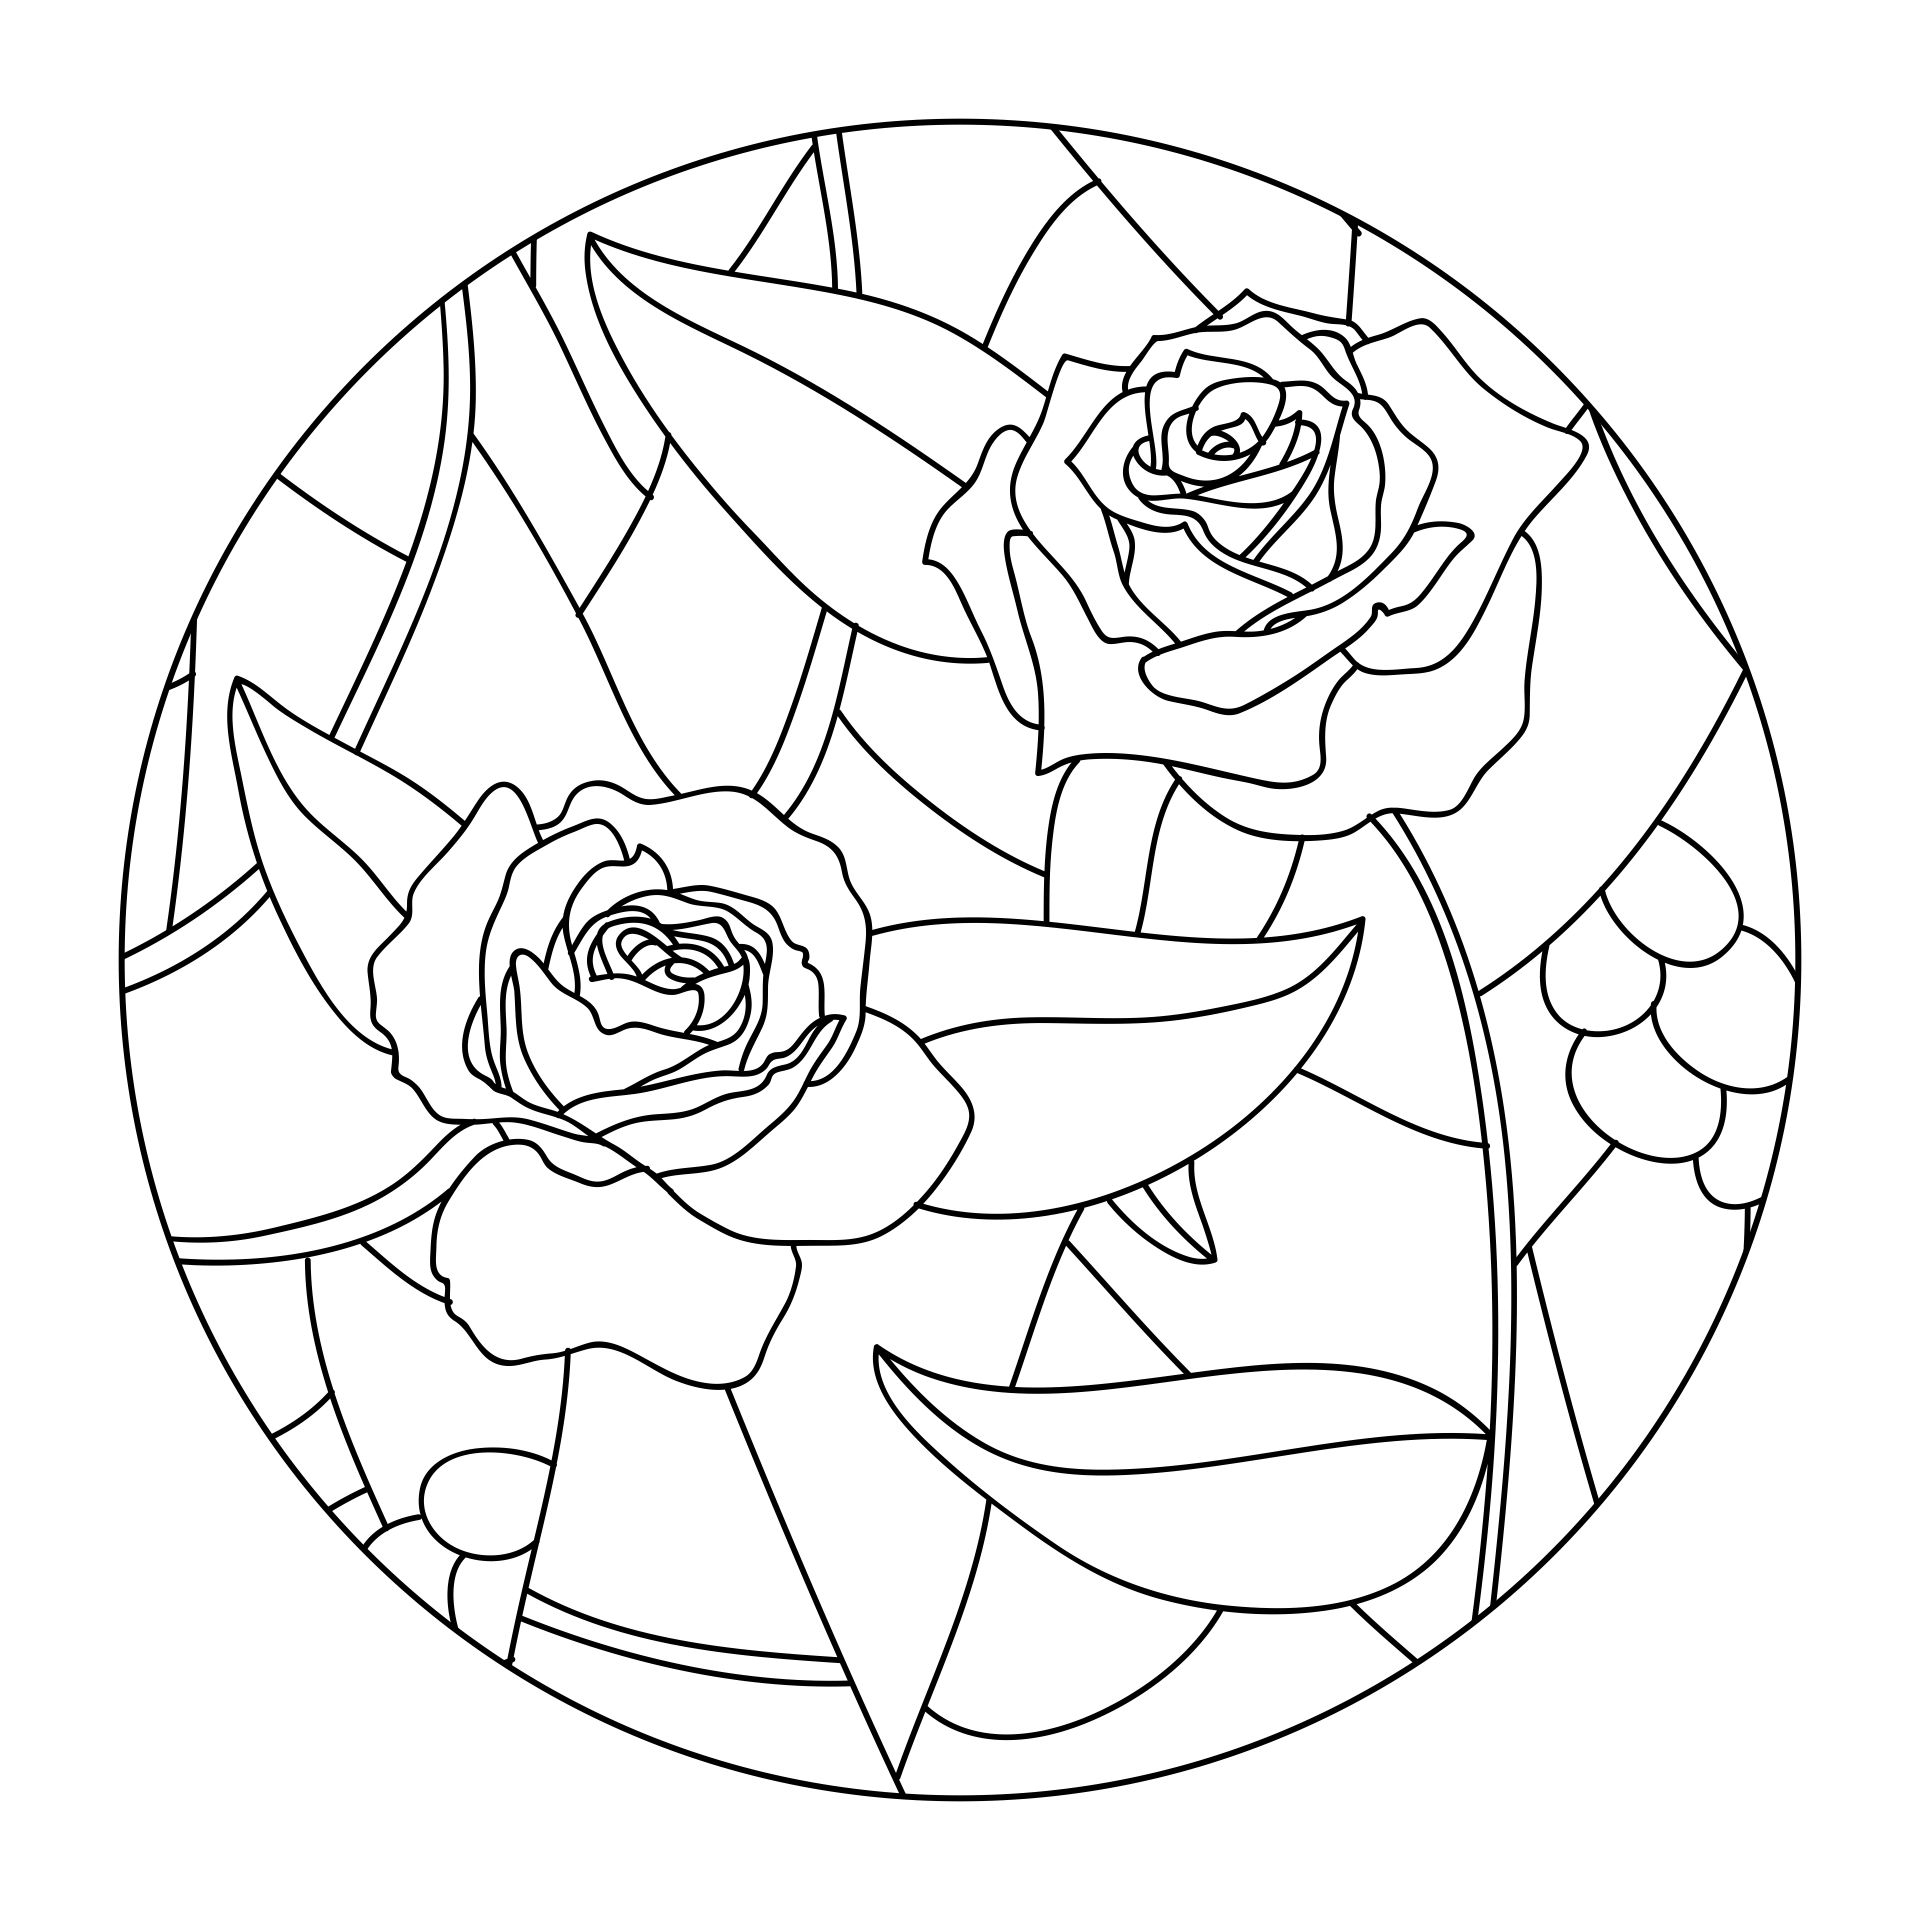 Printable Rose Window Stained Glass Patterns